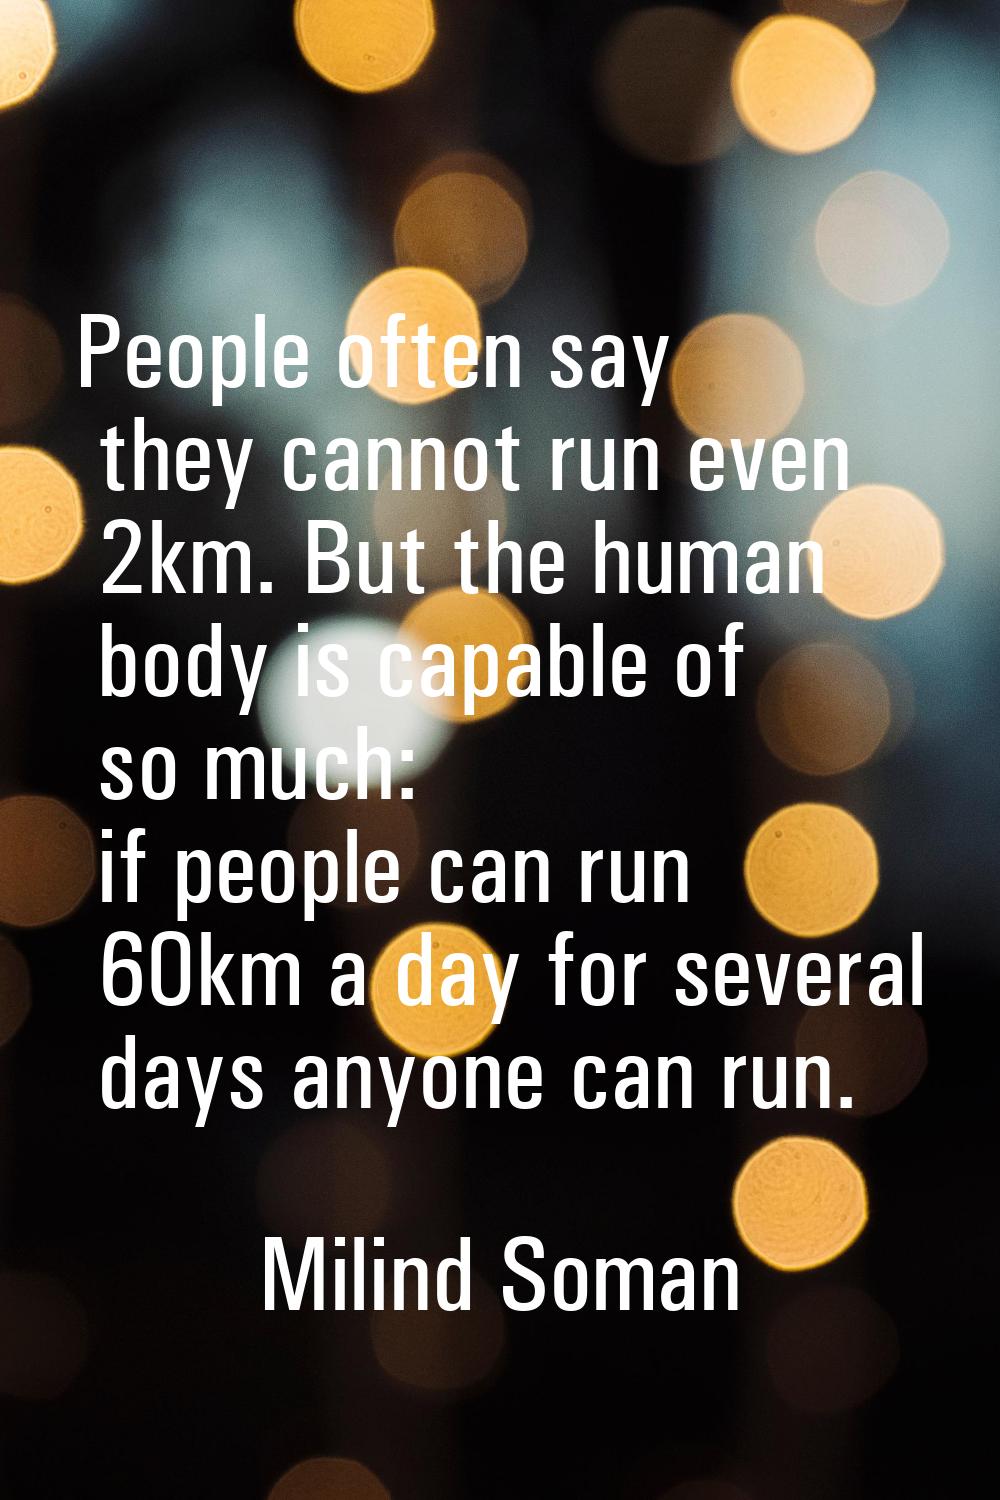 People often say they cannot run even 2km. But the human body is capable of so much: if people can 